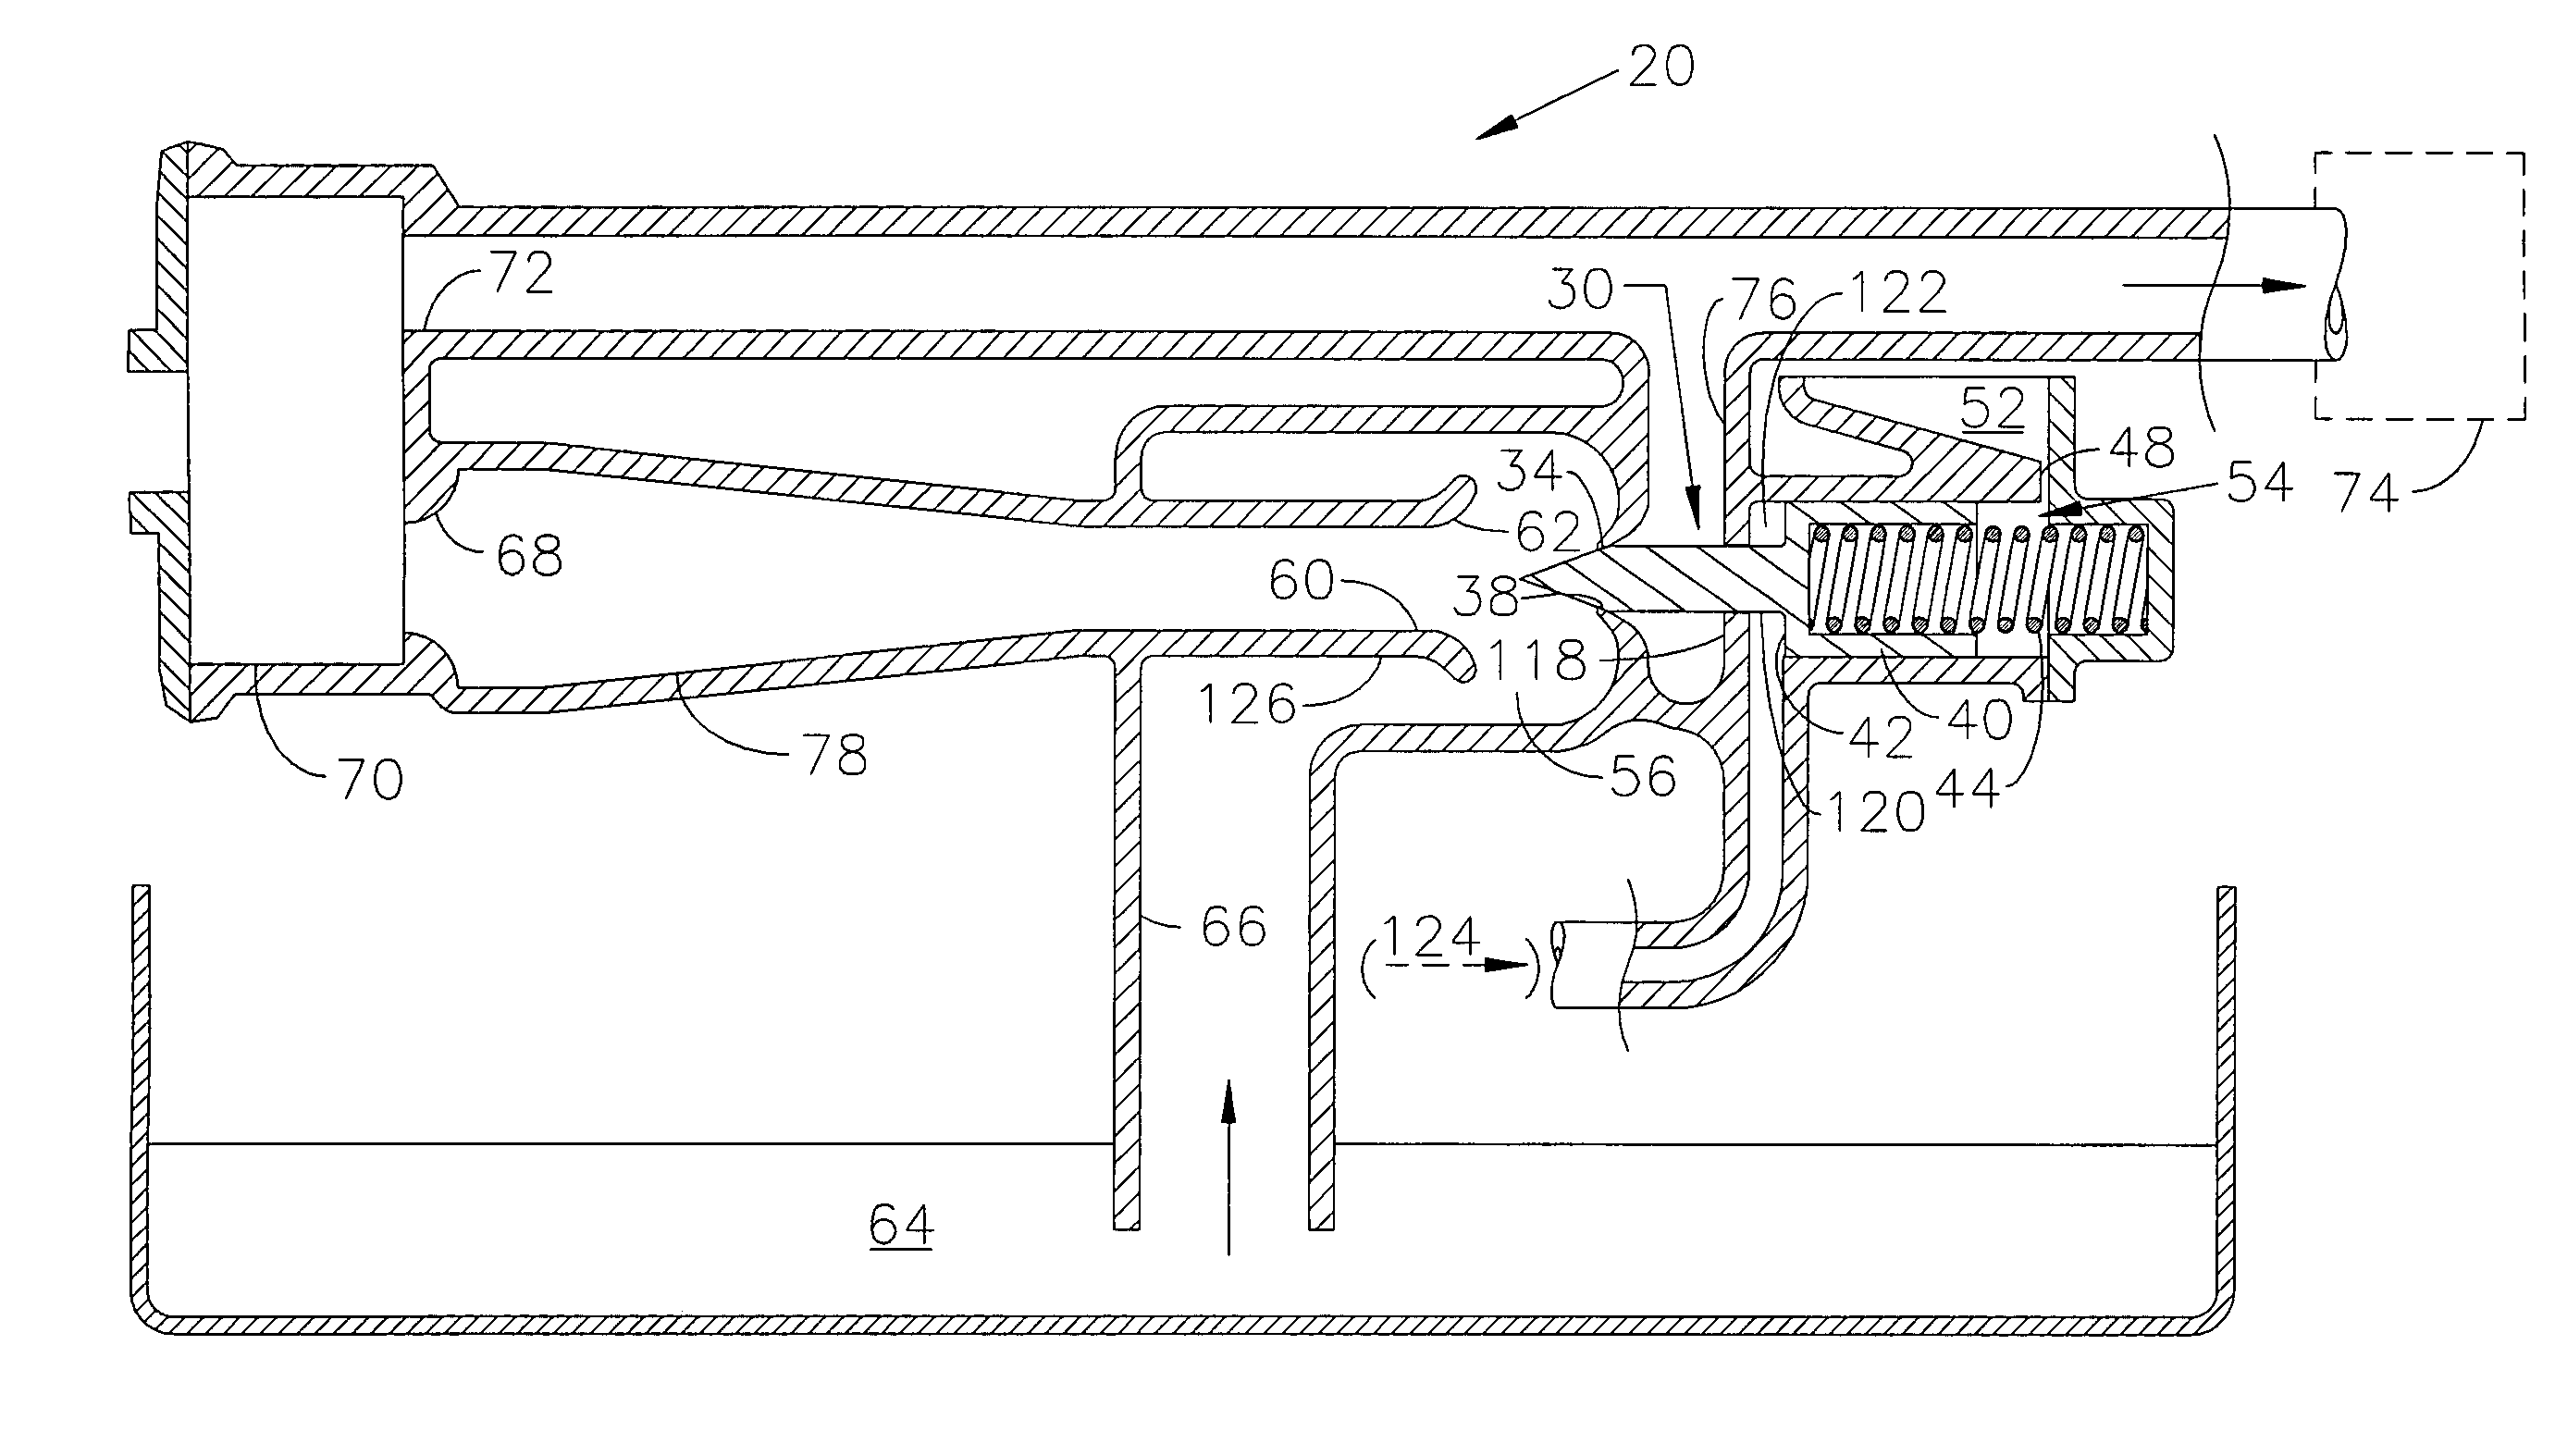 Cavitation-deterring energy-efficient fluid pump system and method of operation